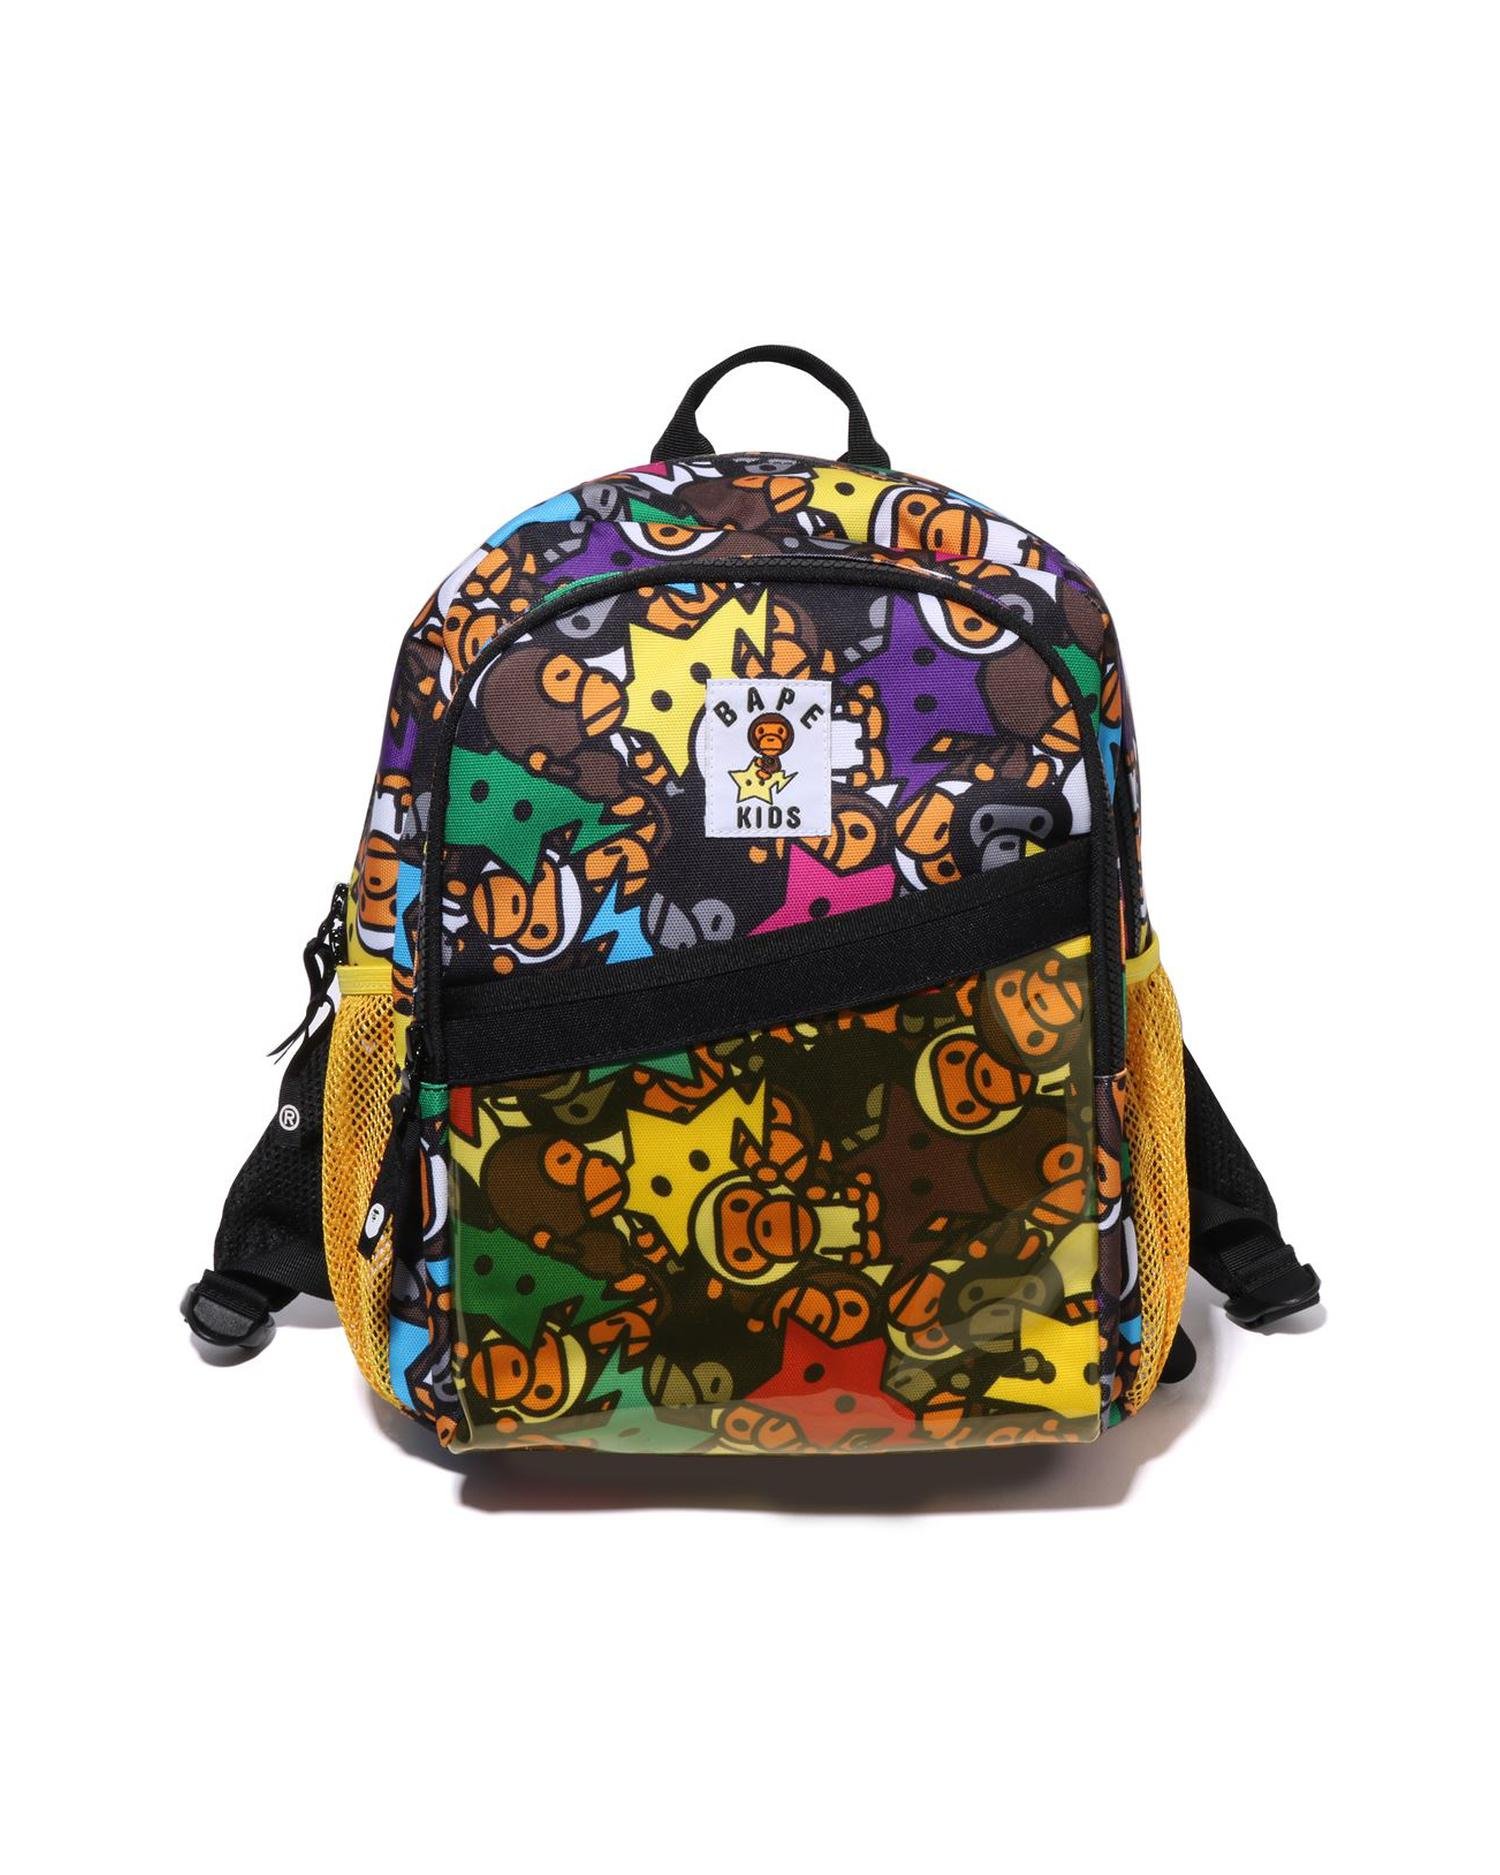 Kids All Baby Milo STA Daypack by BAPE